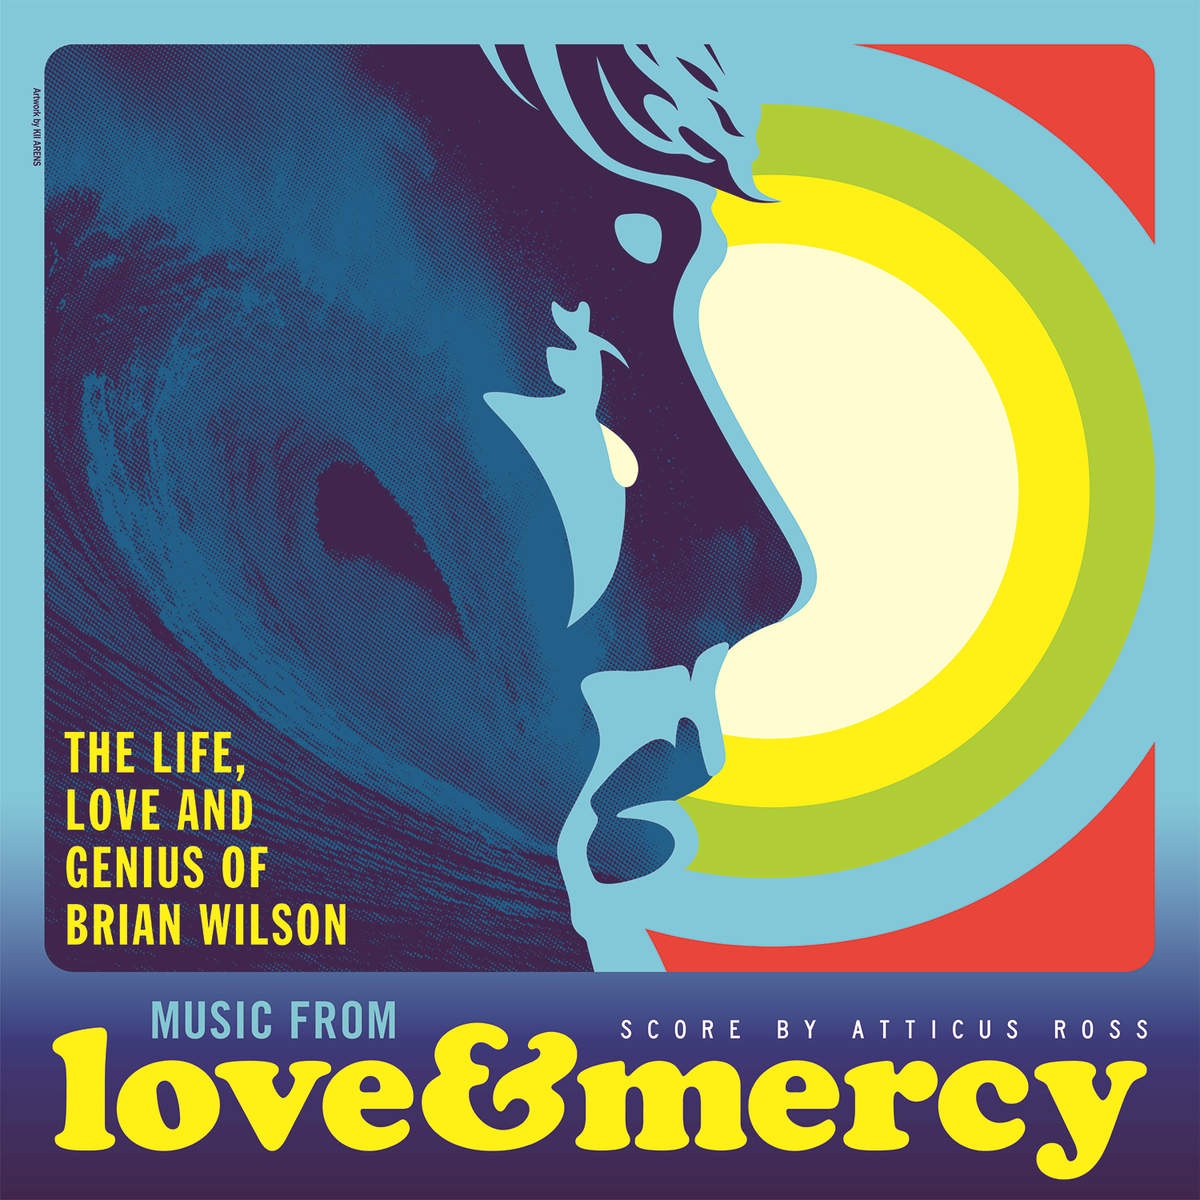 The Black Hole - From “Love & Mercy – The Life, Love And Genius Of Brian Wilson” Soundtrack